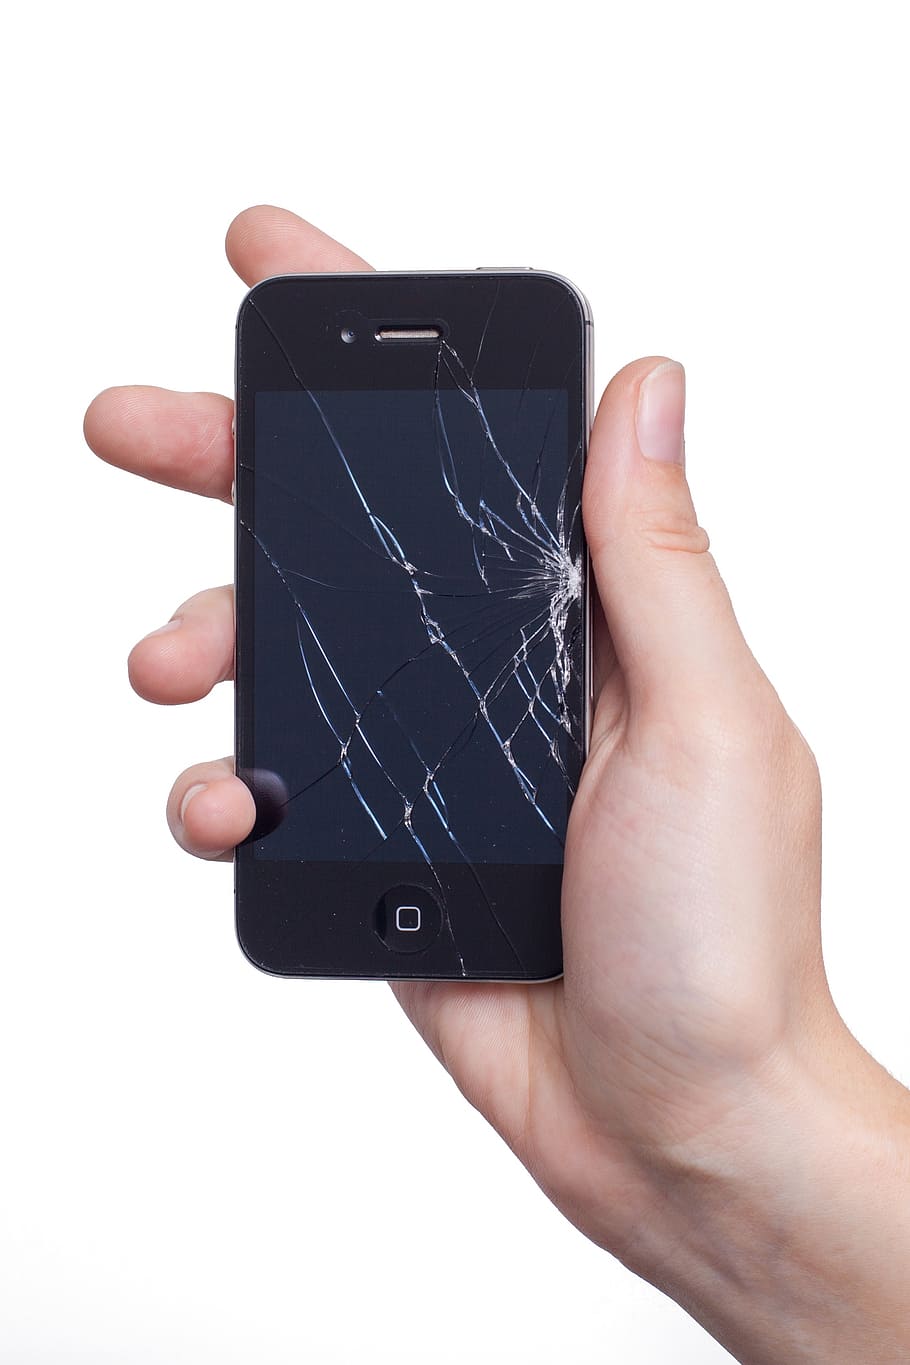 person, holding, cracked, black, iphone 4, display, apple, iphone, display damage, ad